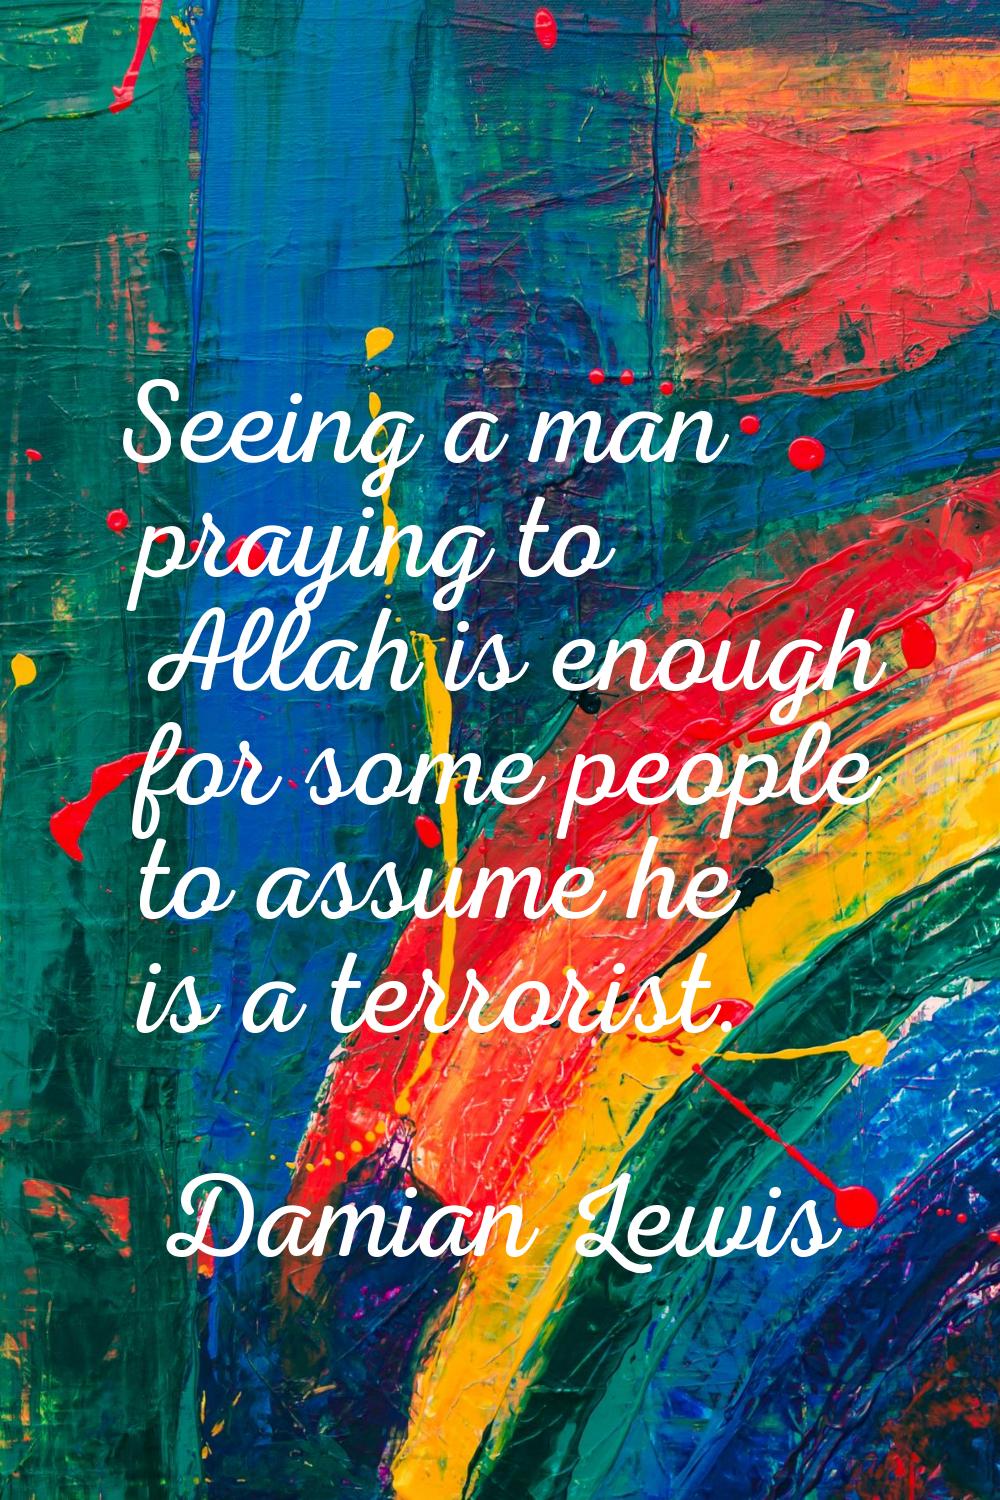 Seeing a man praying to Allah is enough for some people to assume he is a terrorist.